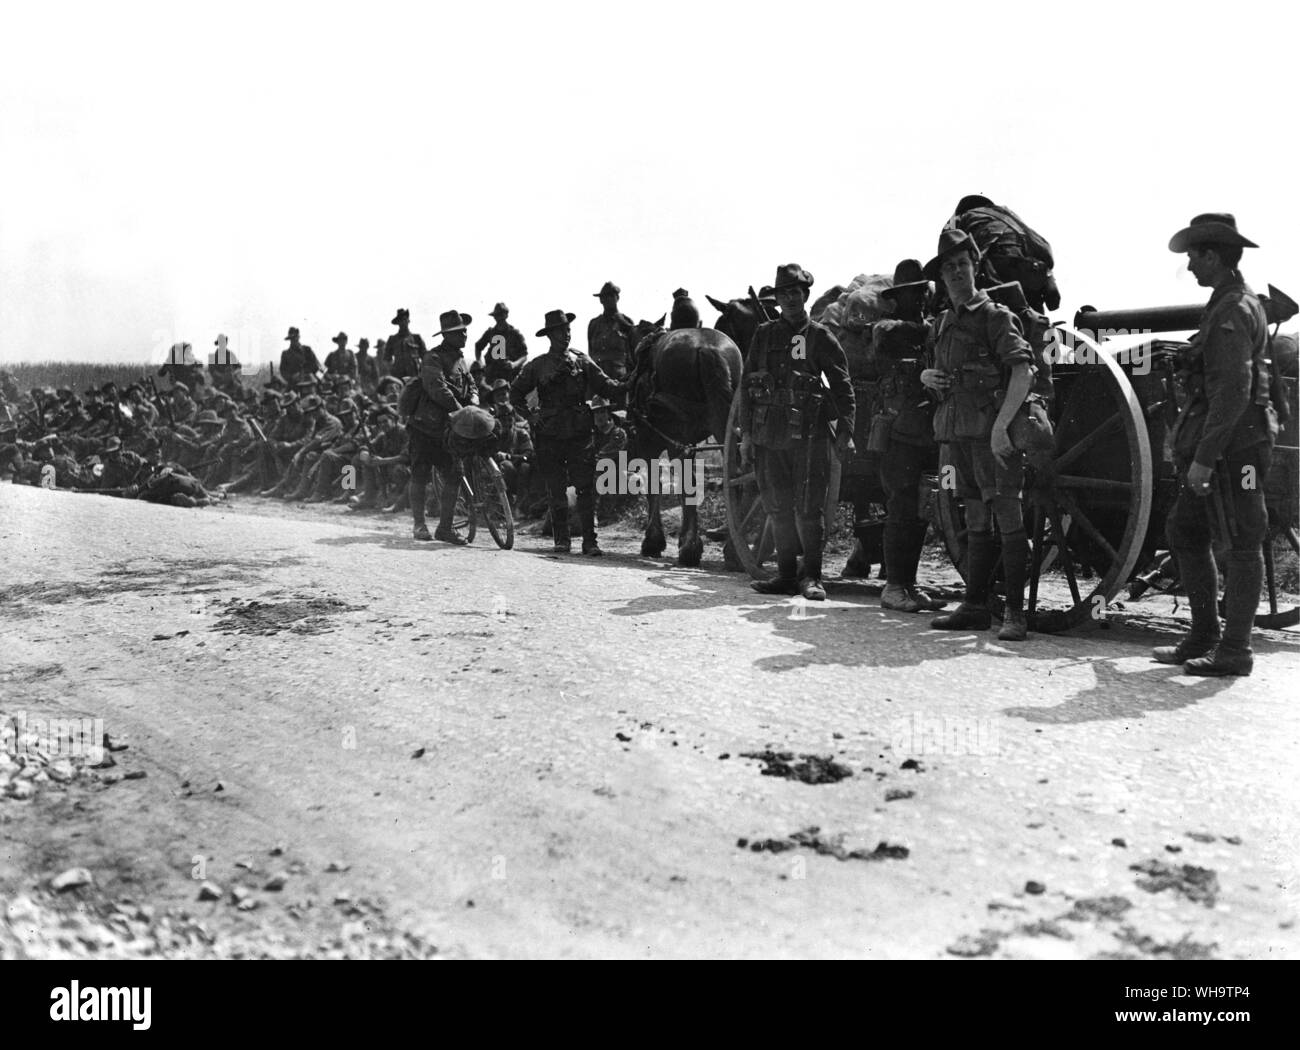 France/WW1: Men of the 2nd Australian Division resting by the roadside during their march to the Somme area to take part in the Battle of Pozieres Note the field-cooker in foreground. 16th July 1916. Stock Photo